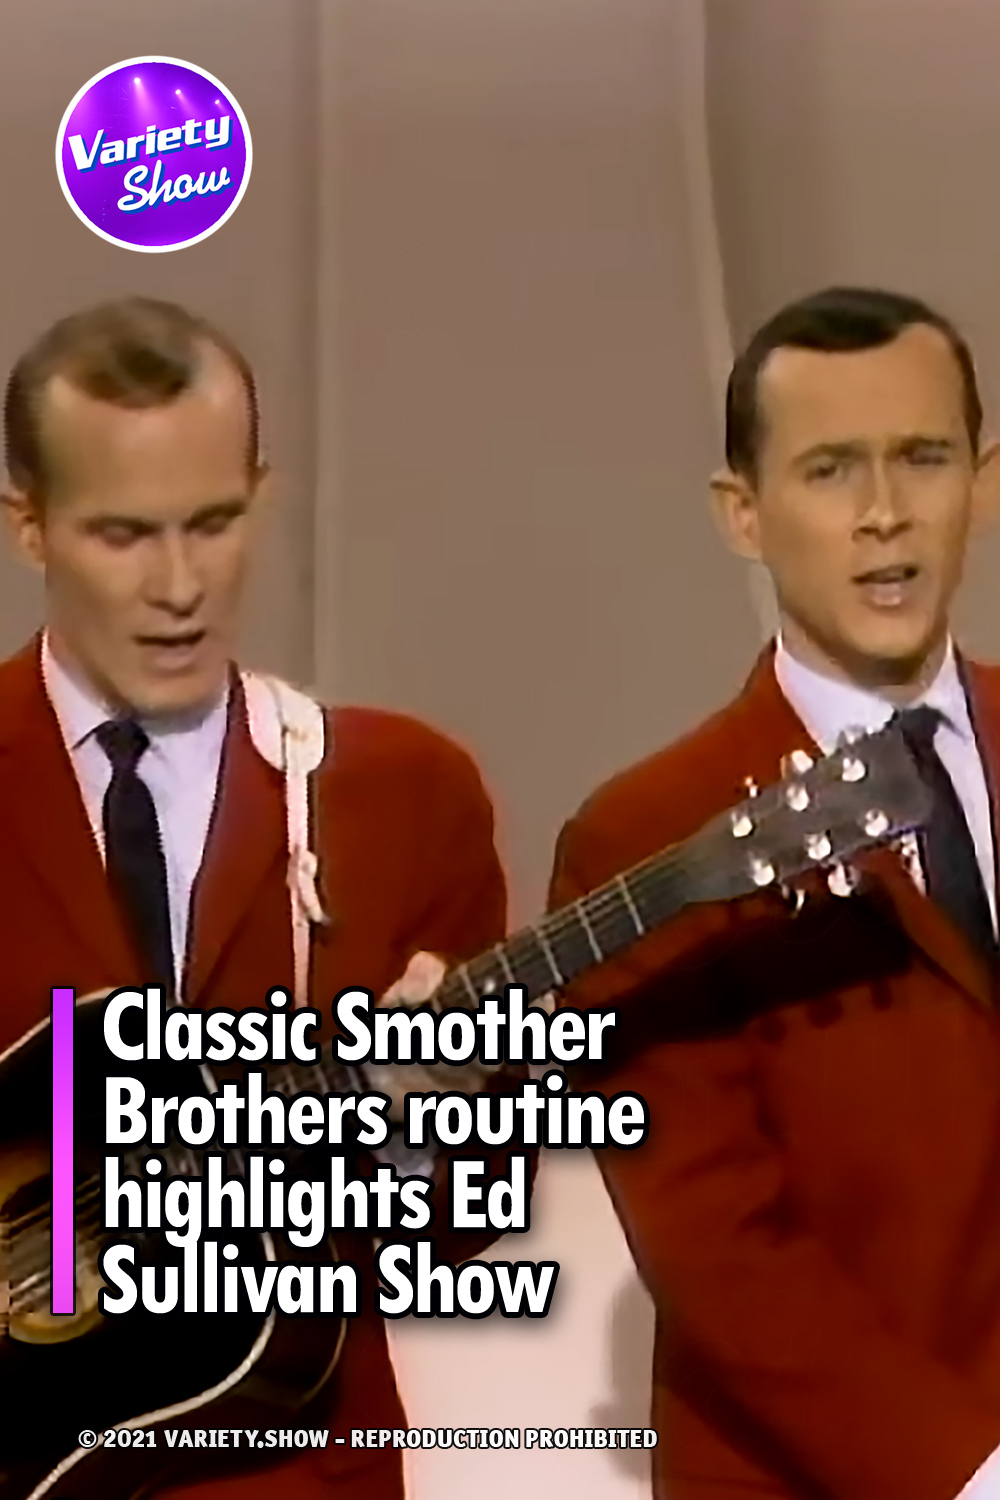 Classic Smother Brothers routine highlights Ed Sullivan Show